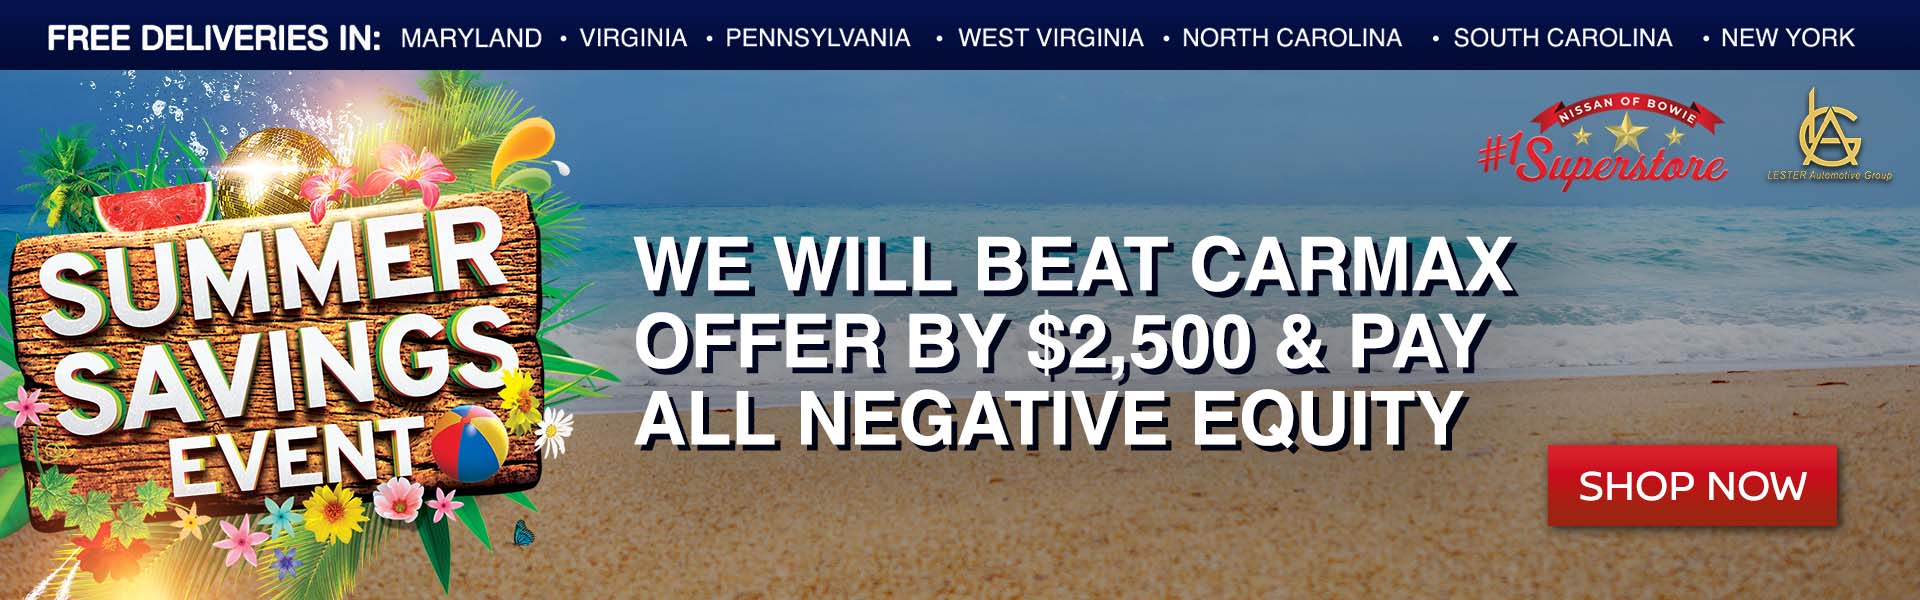 we will beat carmax offer